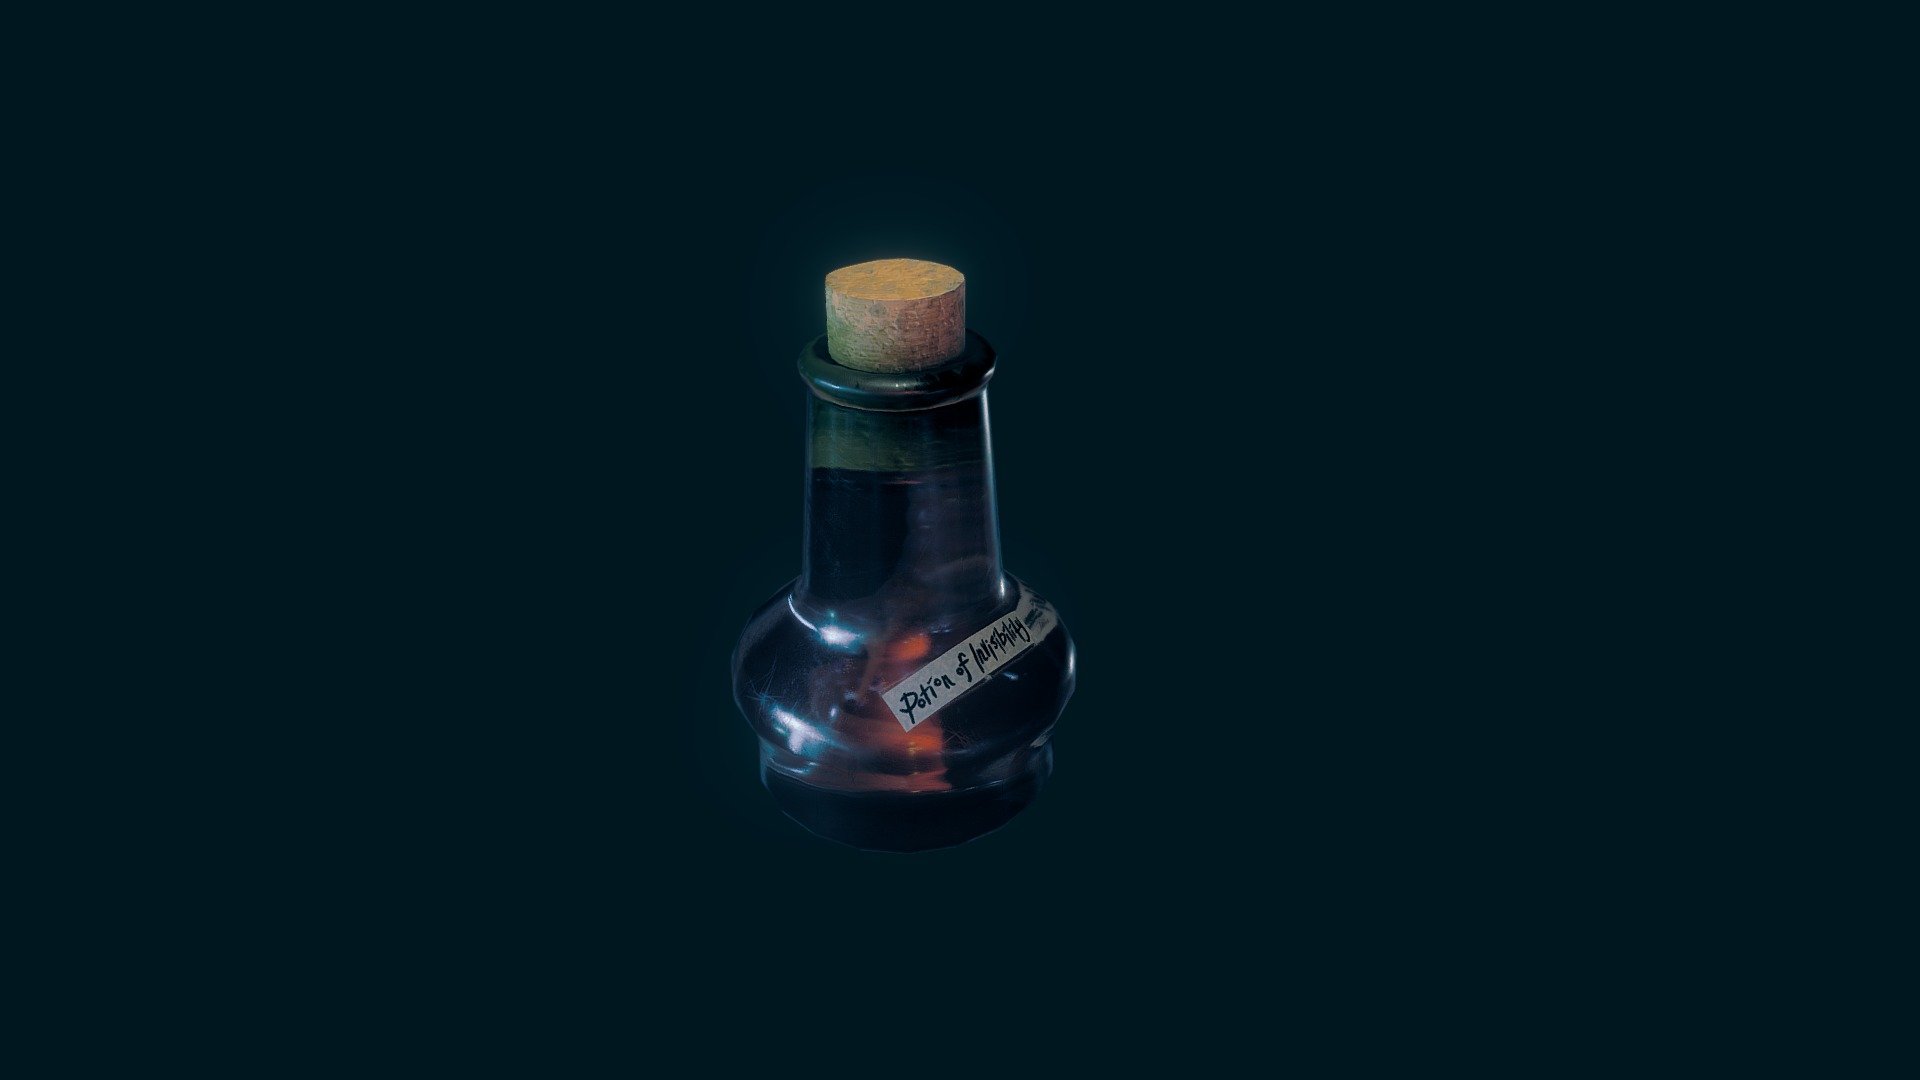 Potion of Invisibility